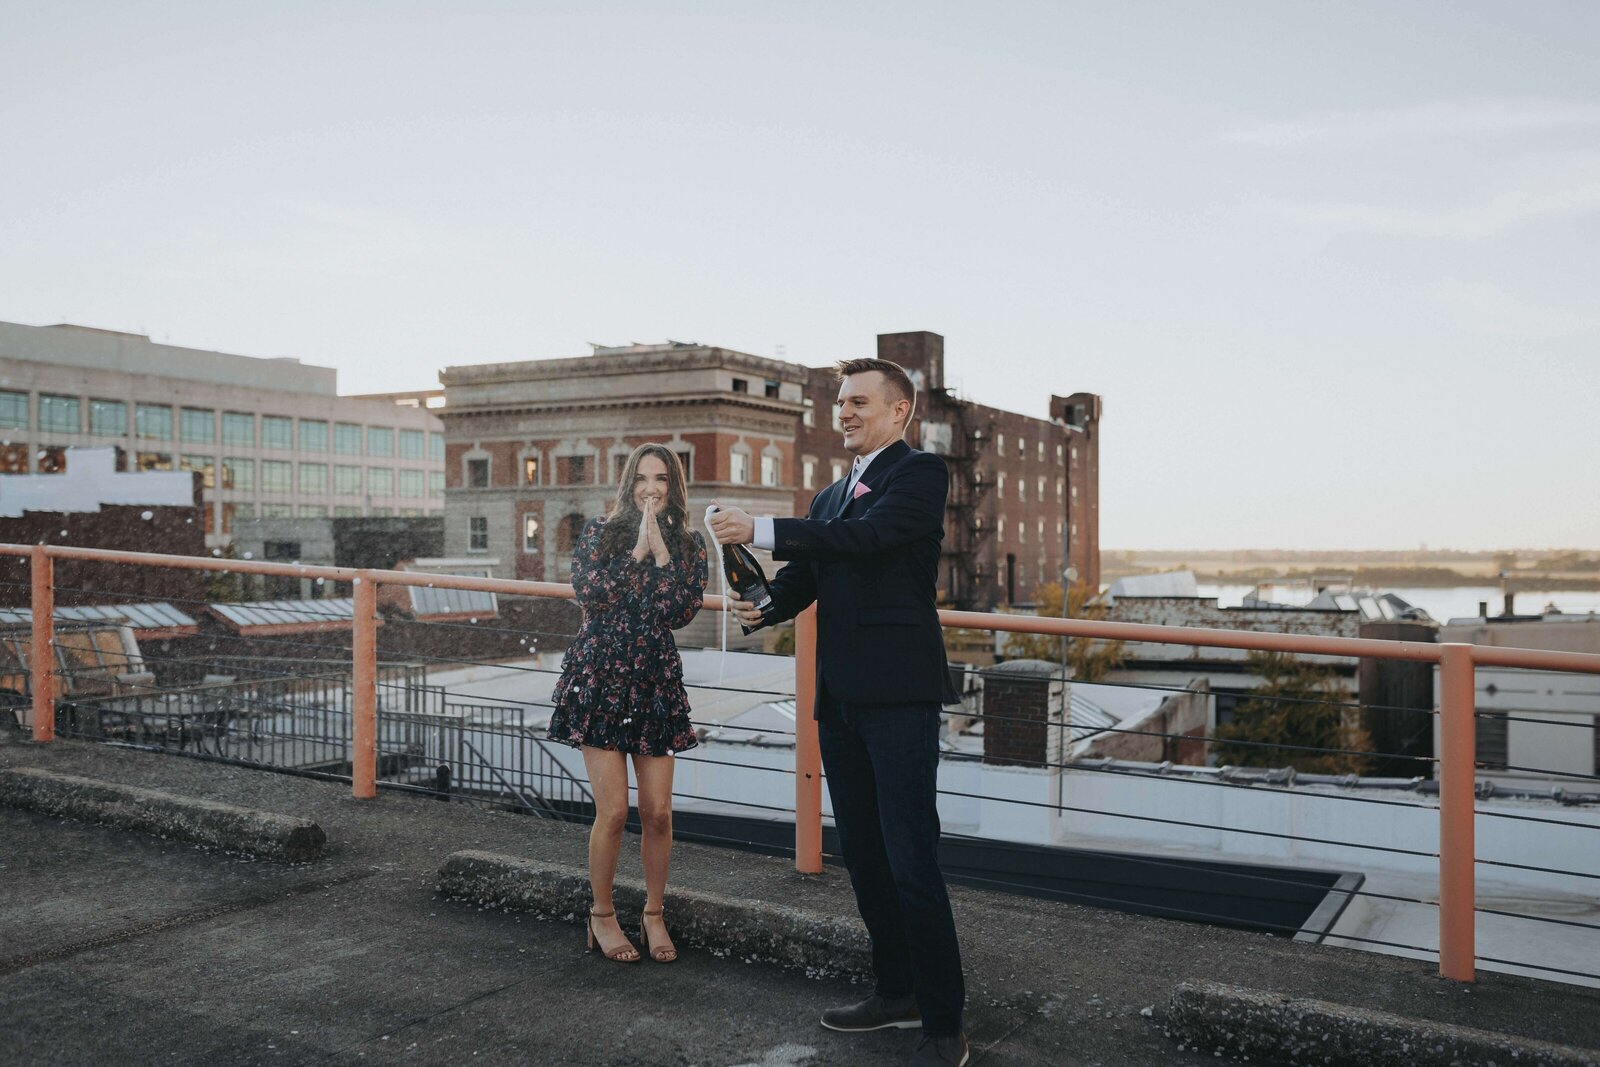 Engaged and popping champagne on a rooftop at sunset!